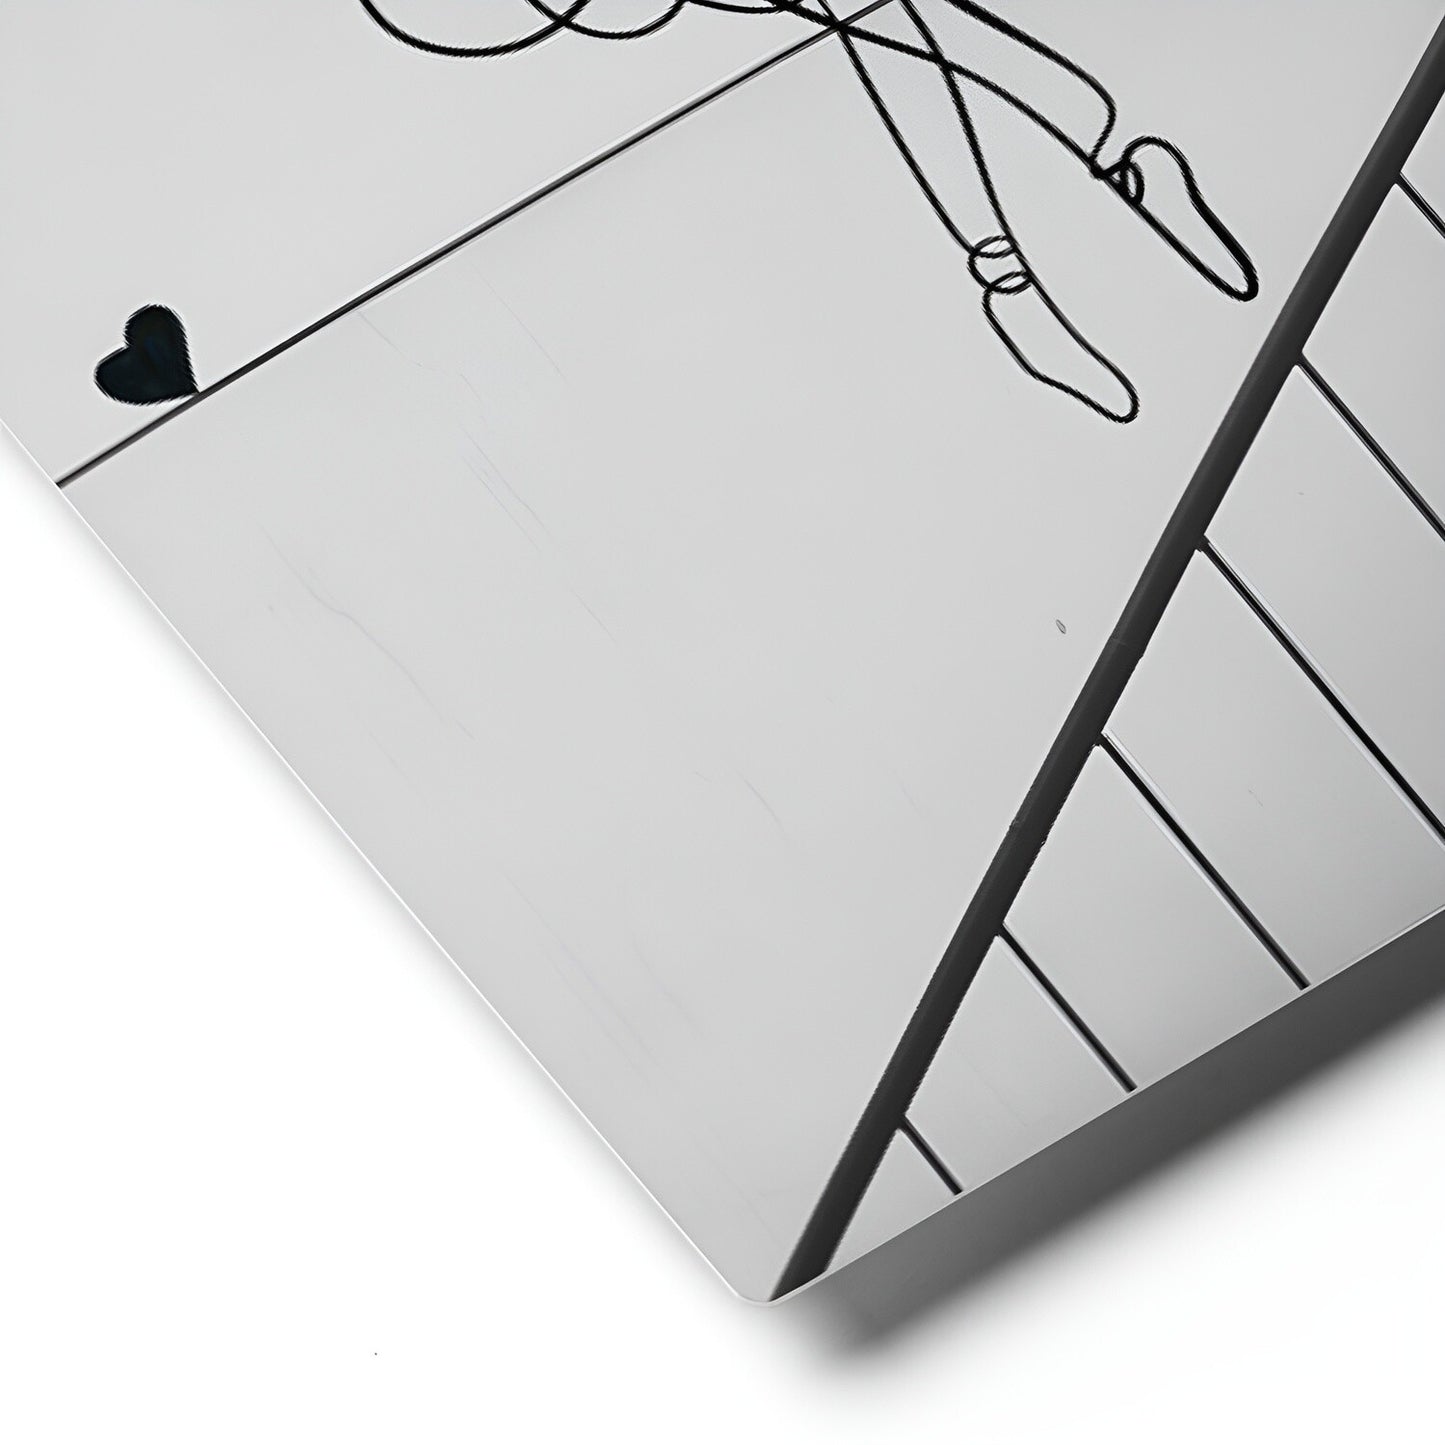 Solo Dance Black and White Metal Wall Art